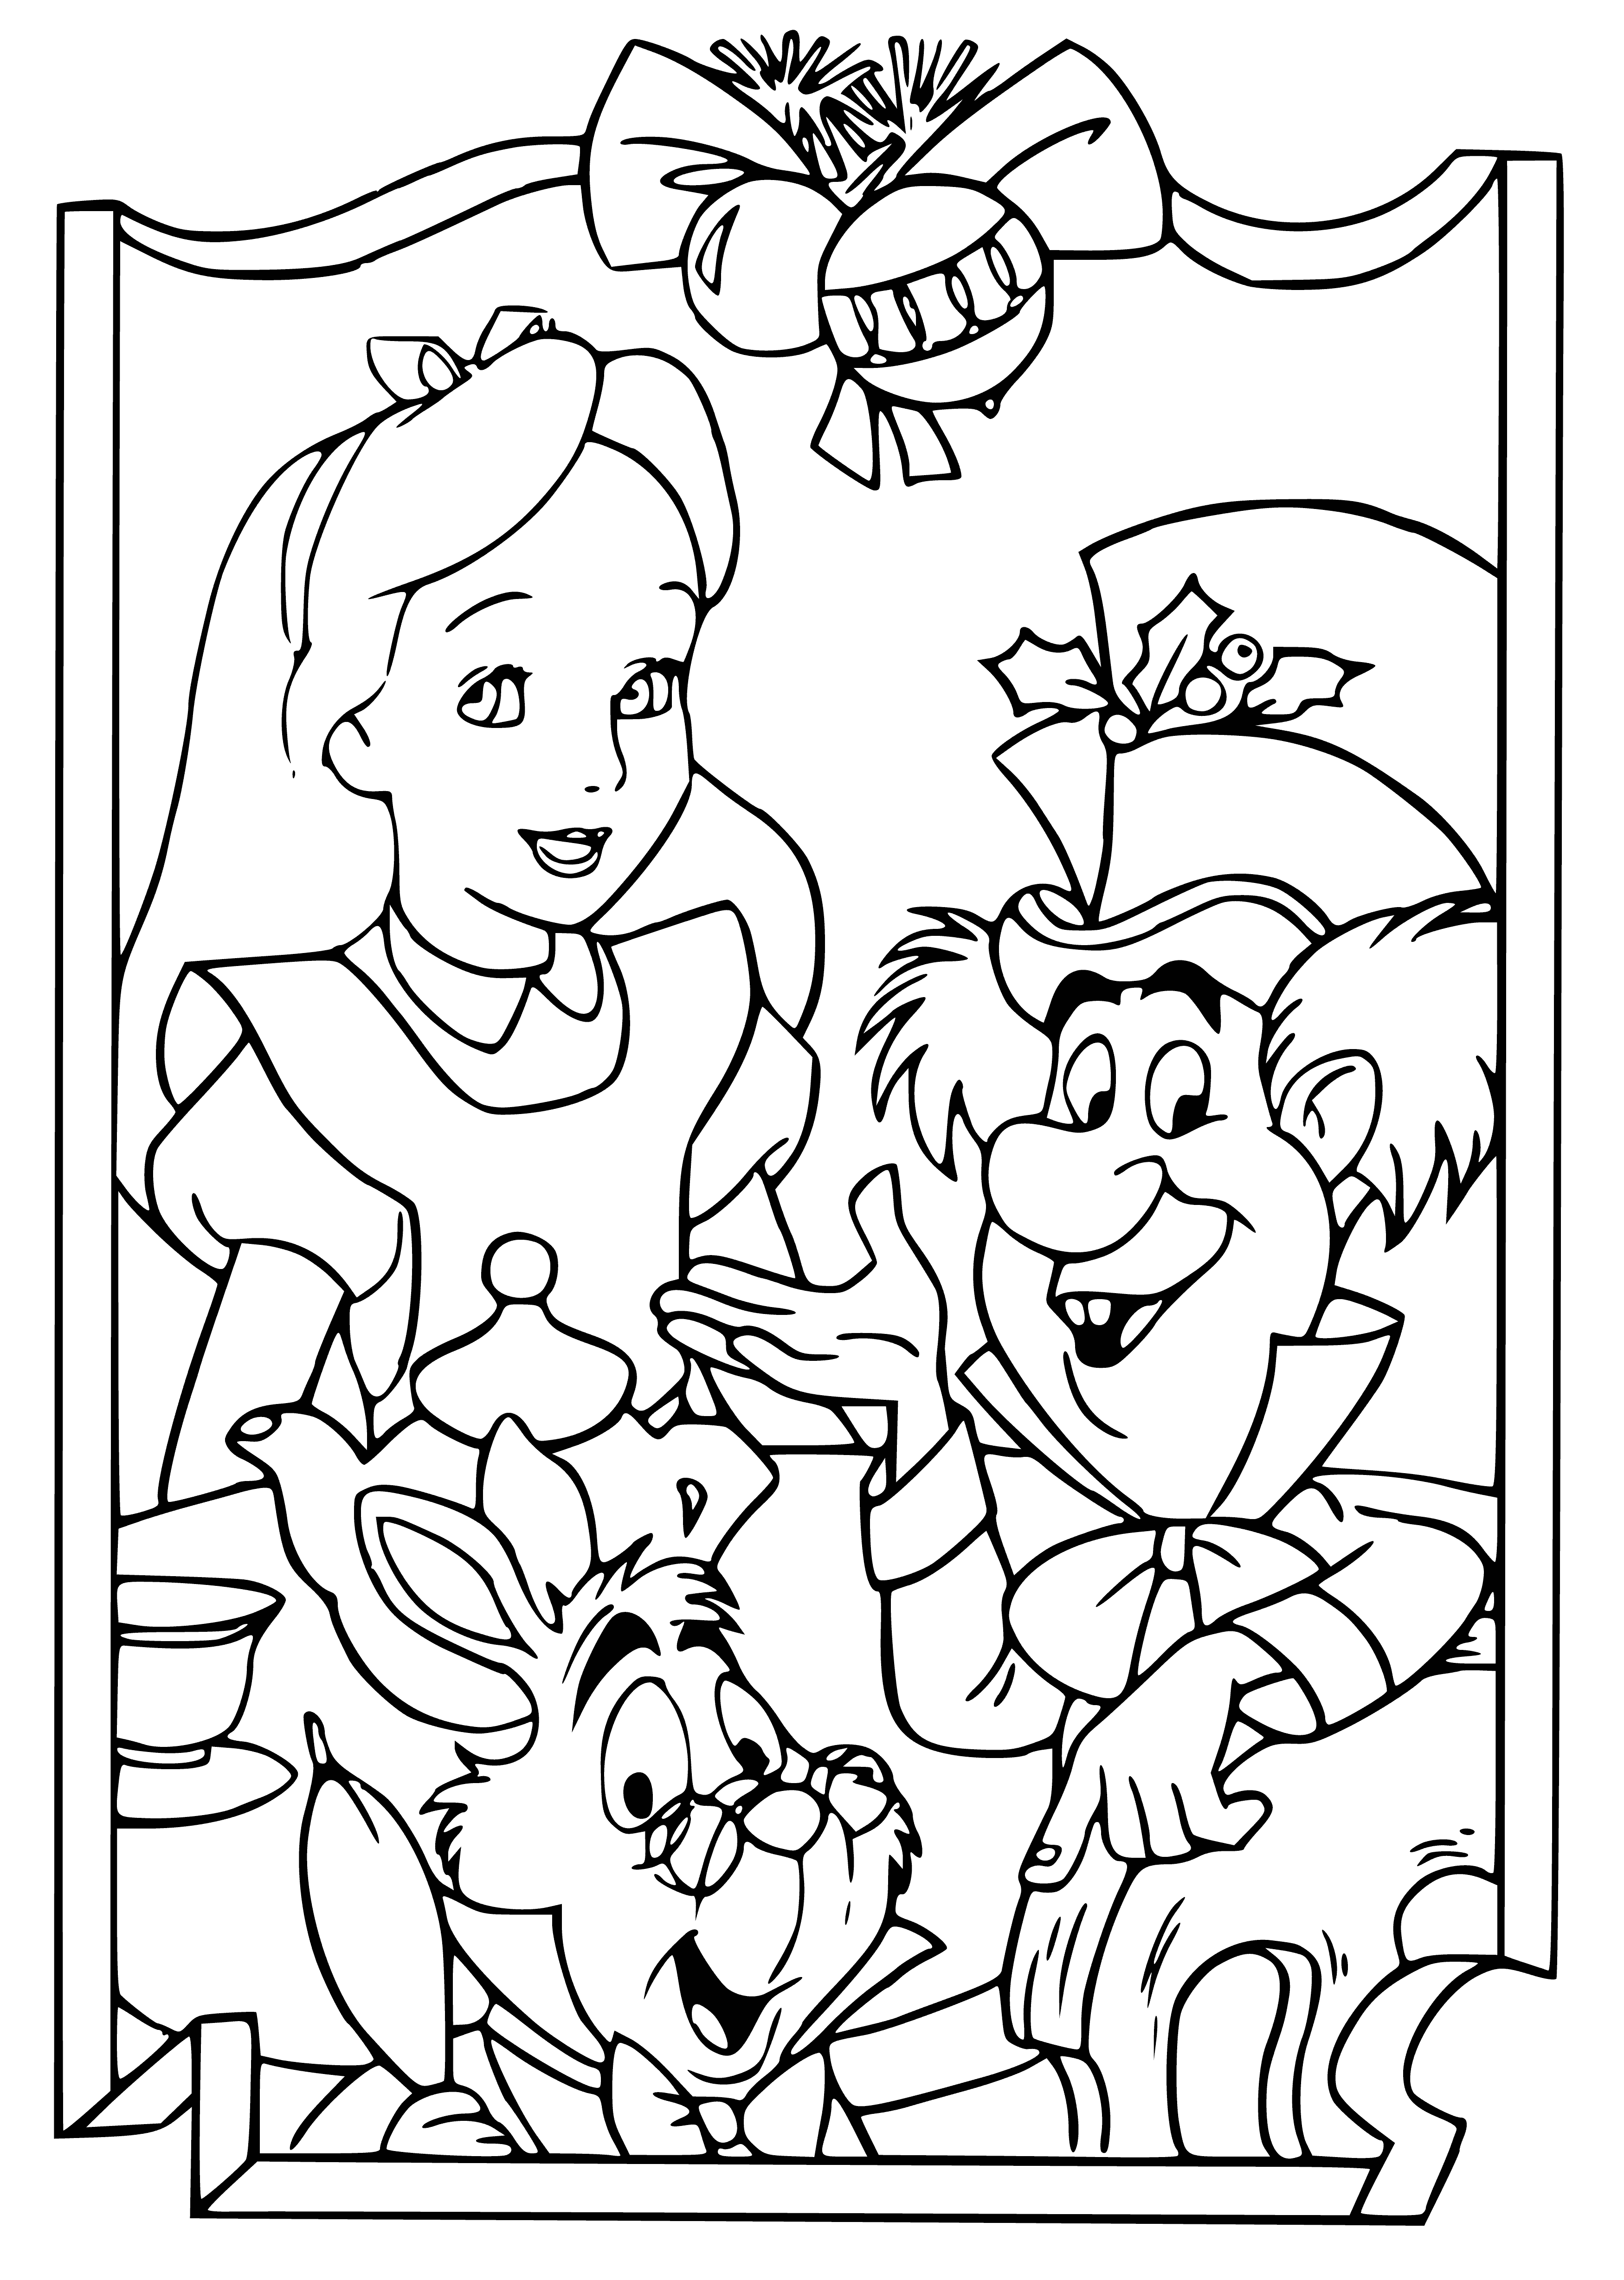 coloring page: Alice & her Disney friends celebrate New Year w/streamers & noisemakers. The White Rabbit, Mad Hatter, Cheshire Cat, Tweedledum & Tweedledee join in!